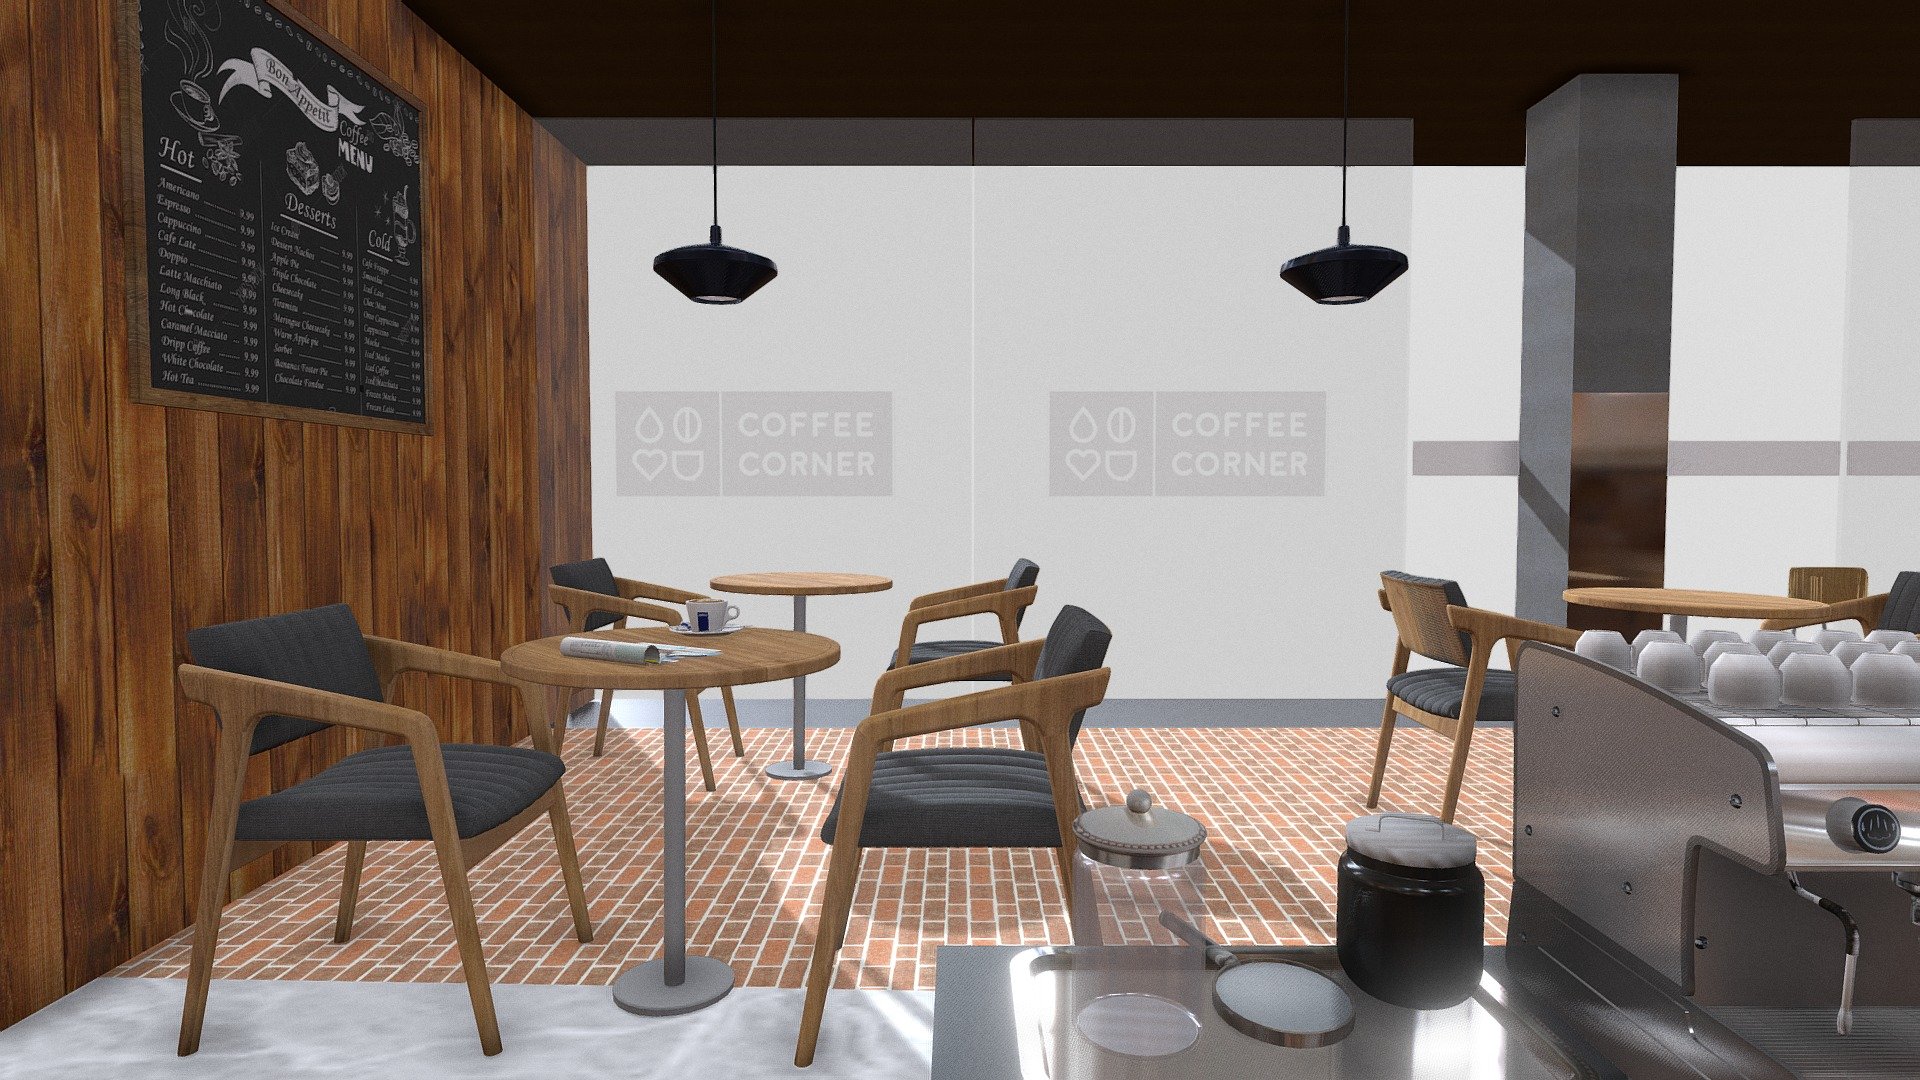 In the morning they can have breakfast in the coffee shop 3d model